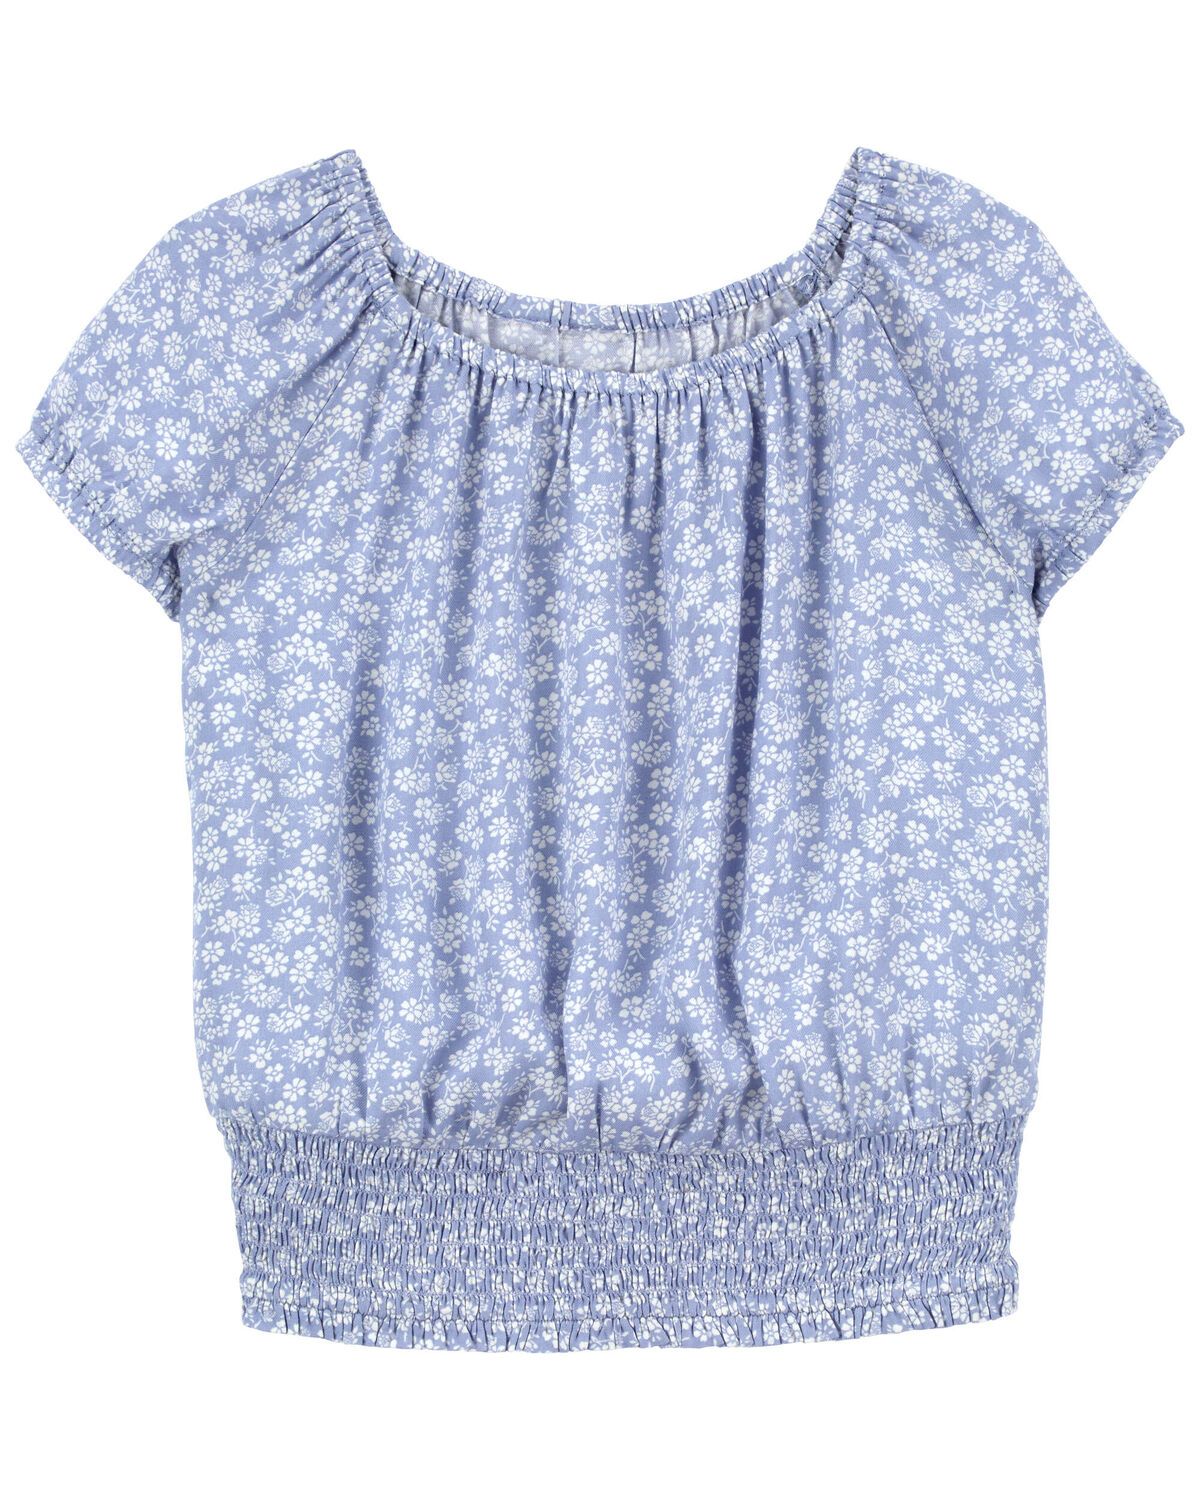 Kid LENZING™ ECOVERO™ Floral Print Smocked Top | Carter's